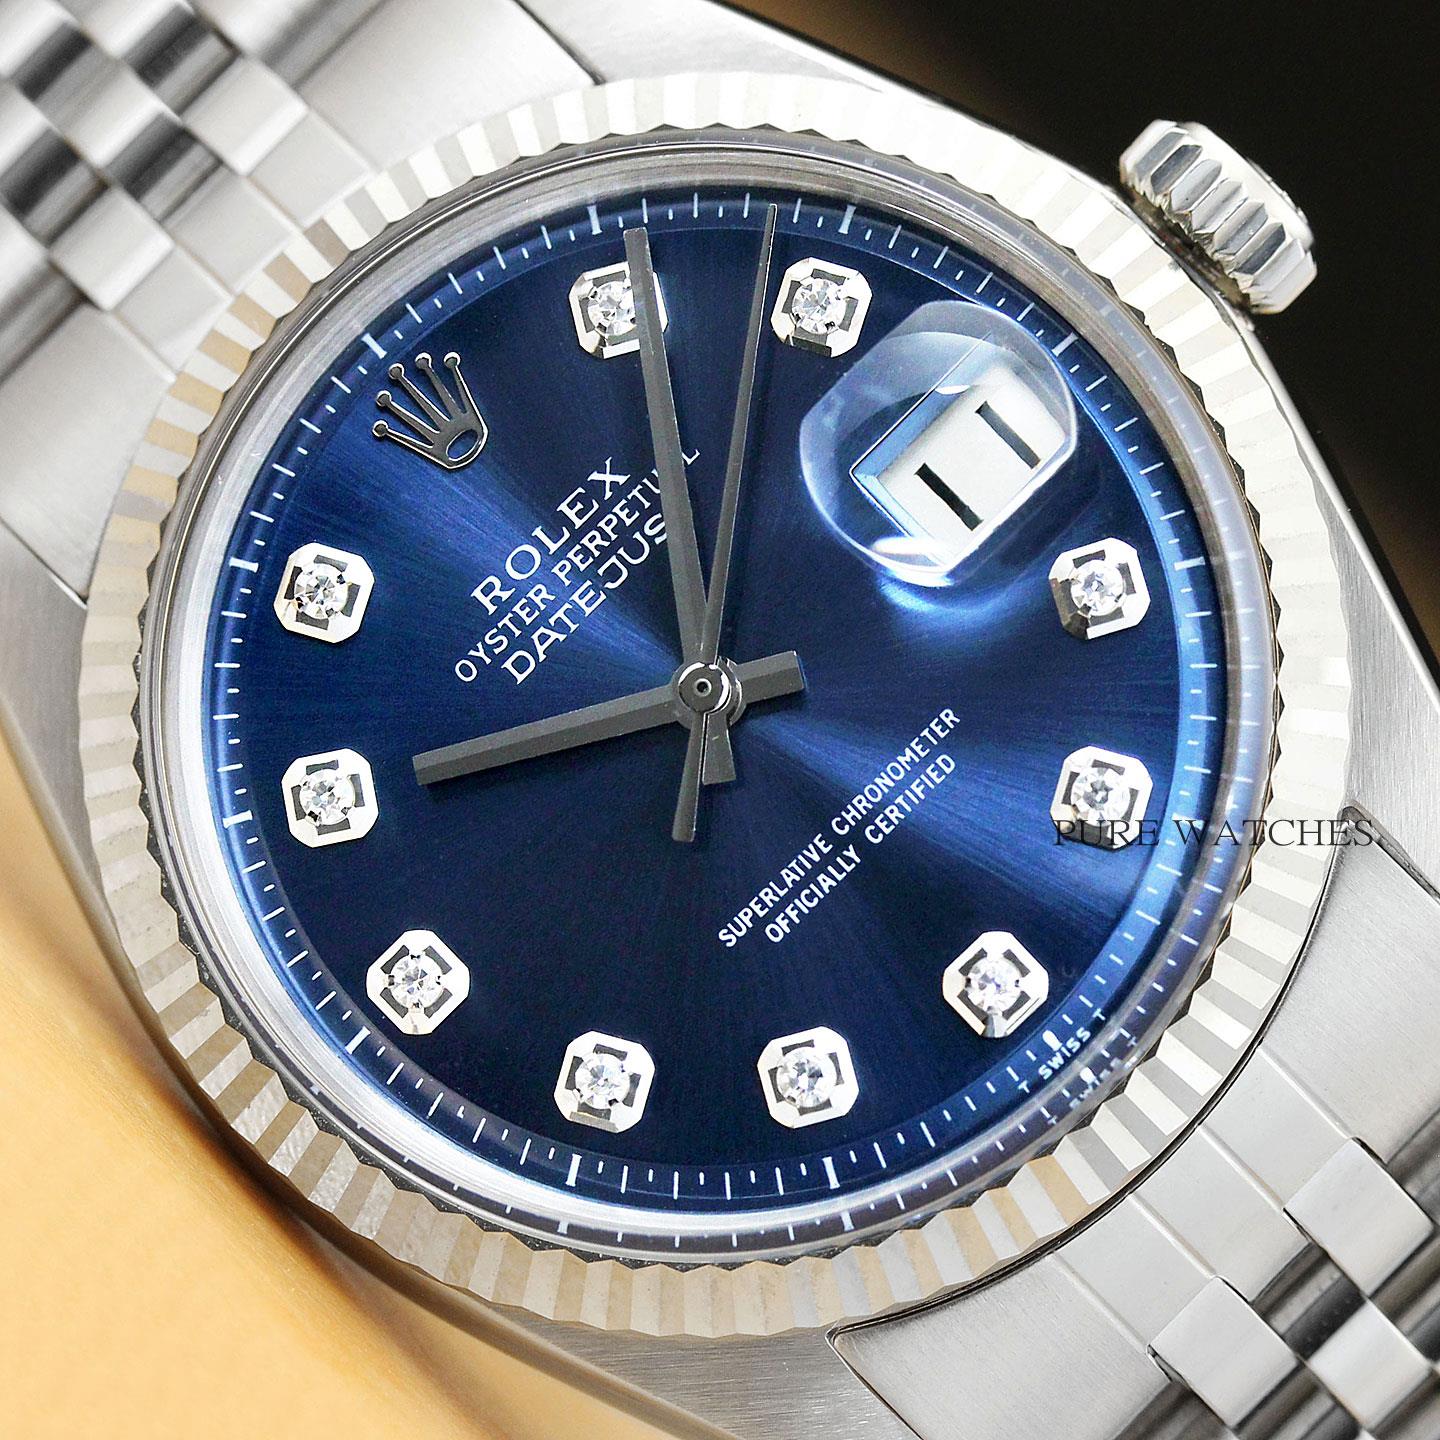 MENS ROLEX DATEJUST 18K WHITE GOLD & STAINLESS STEEL BLUE DIAMOND DIAL ...